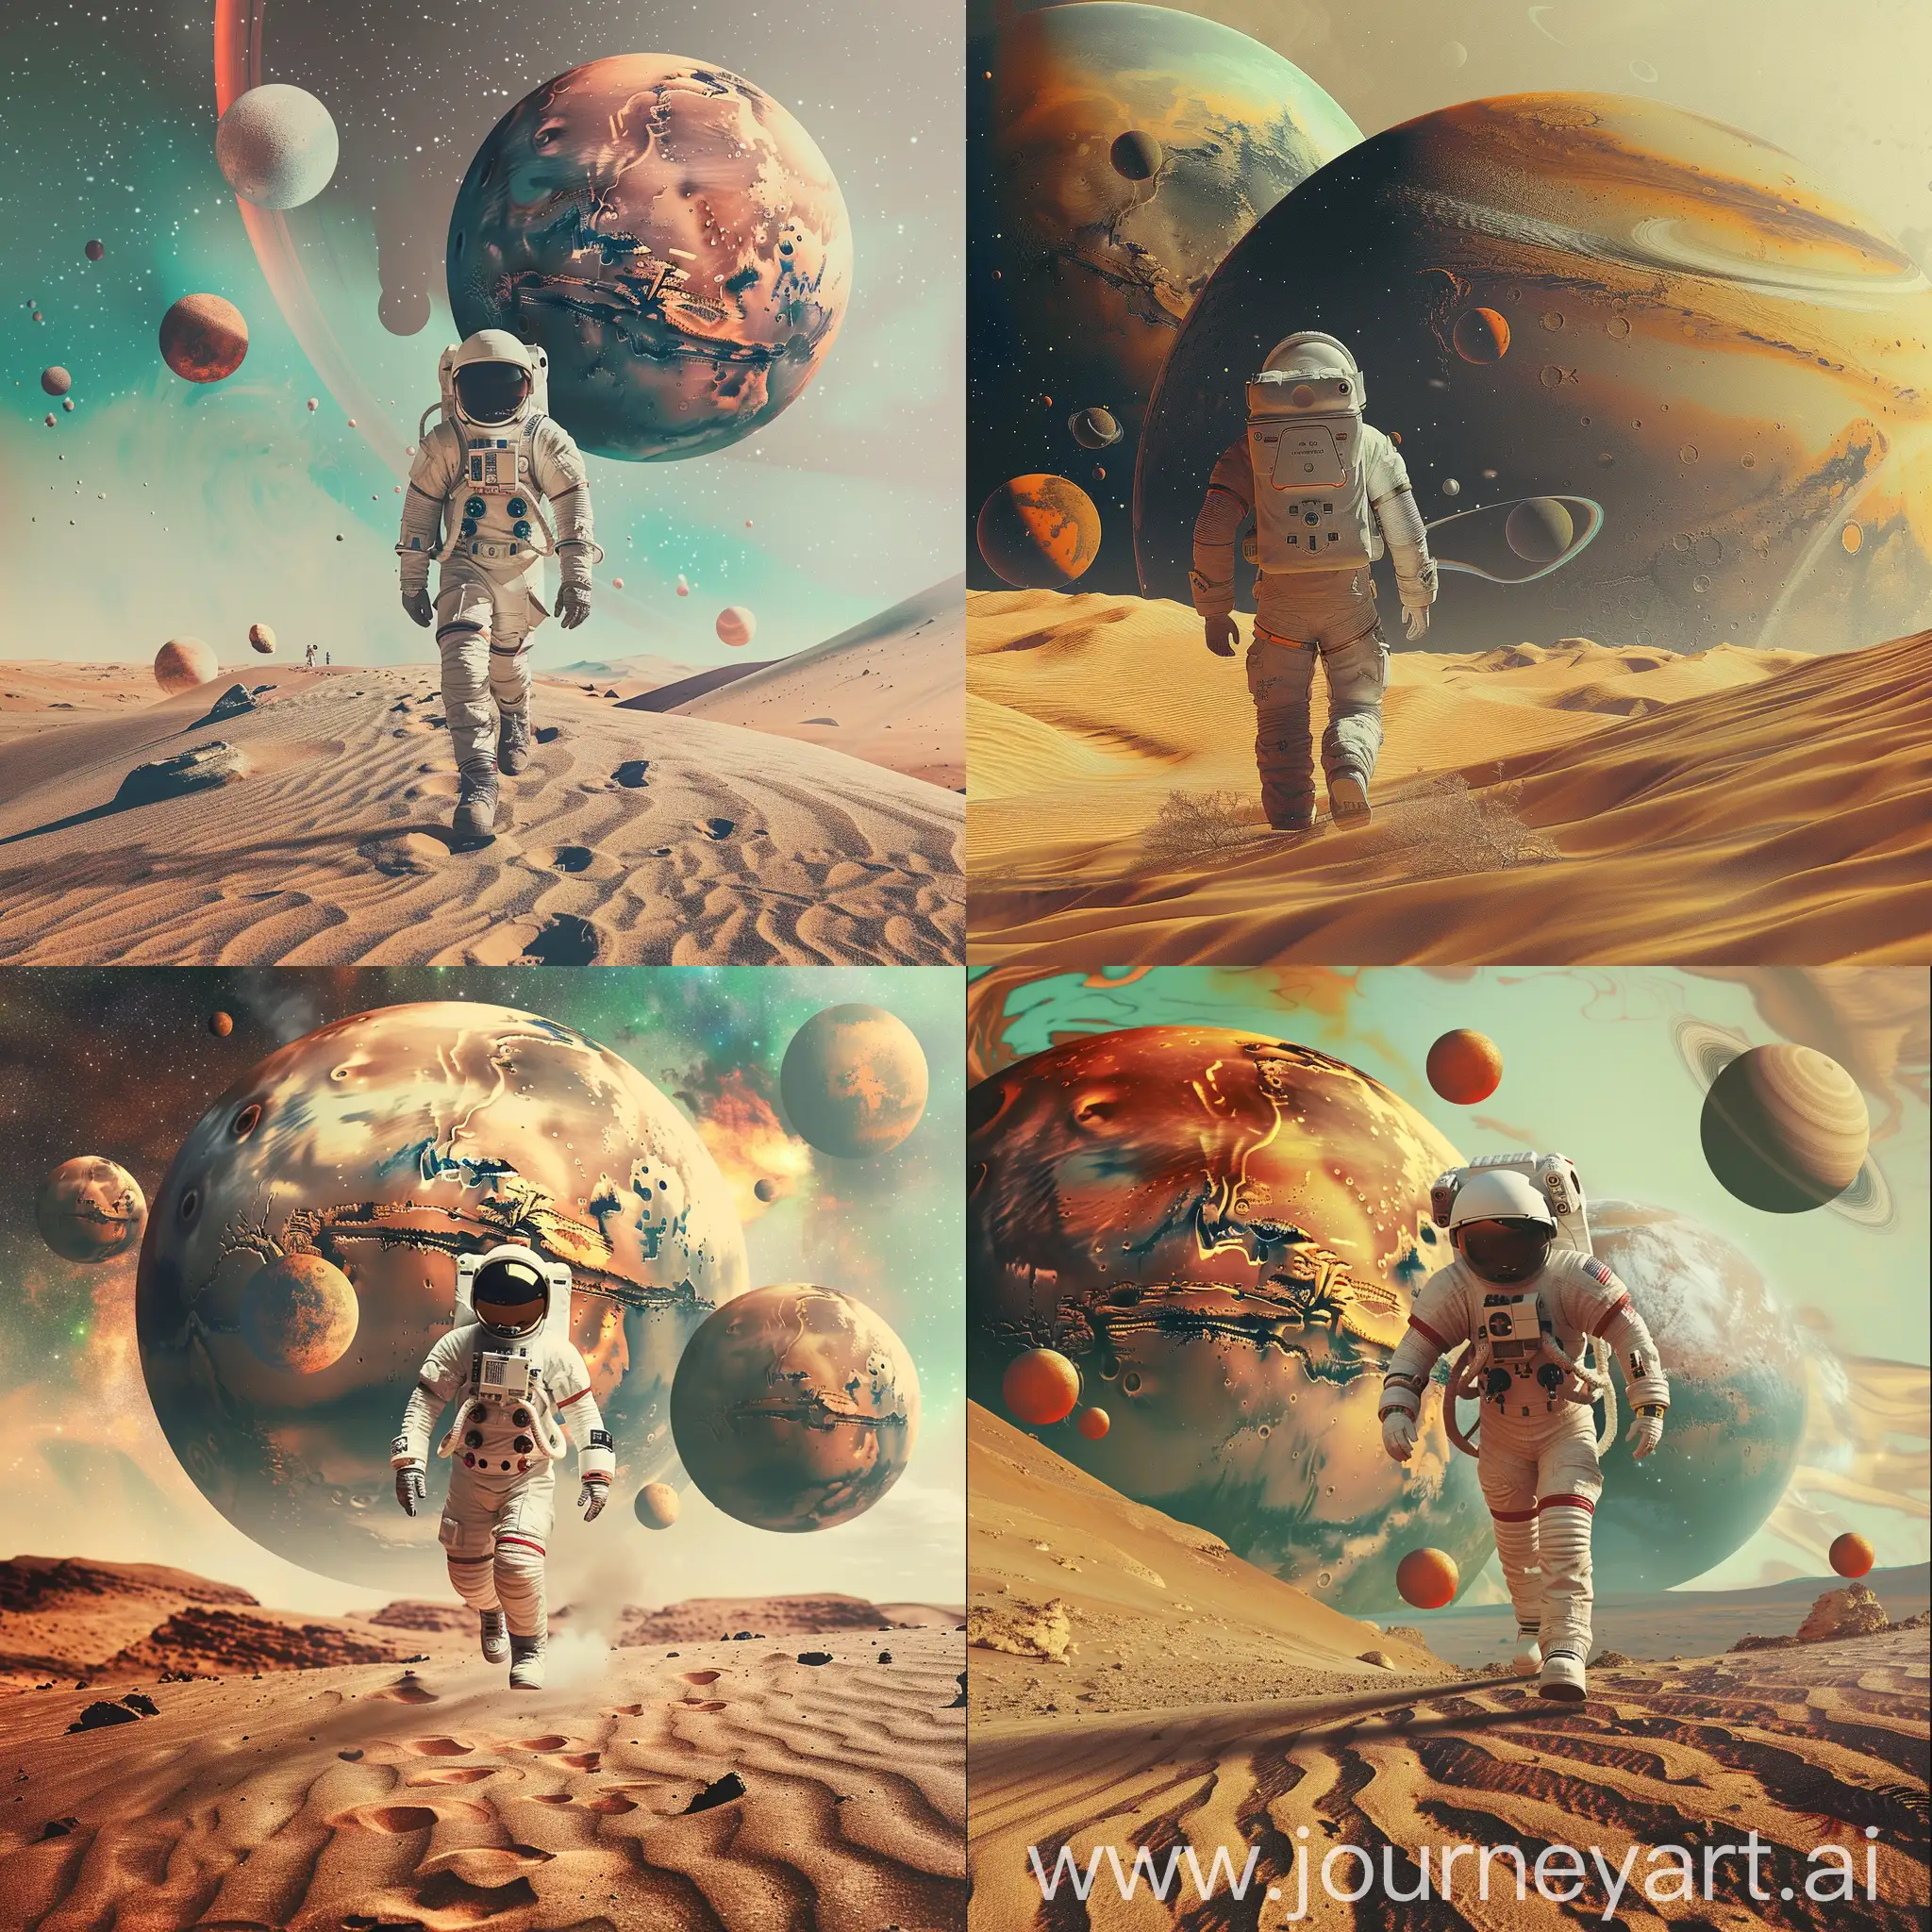 an astronaut walking across a desert, planet mars in the background, floating beside planets, space art